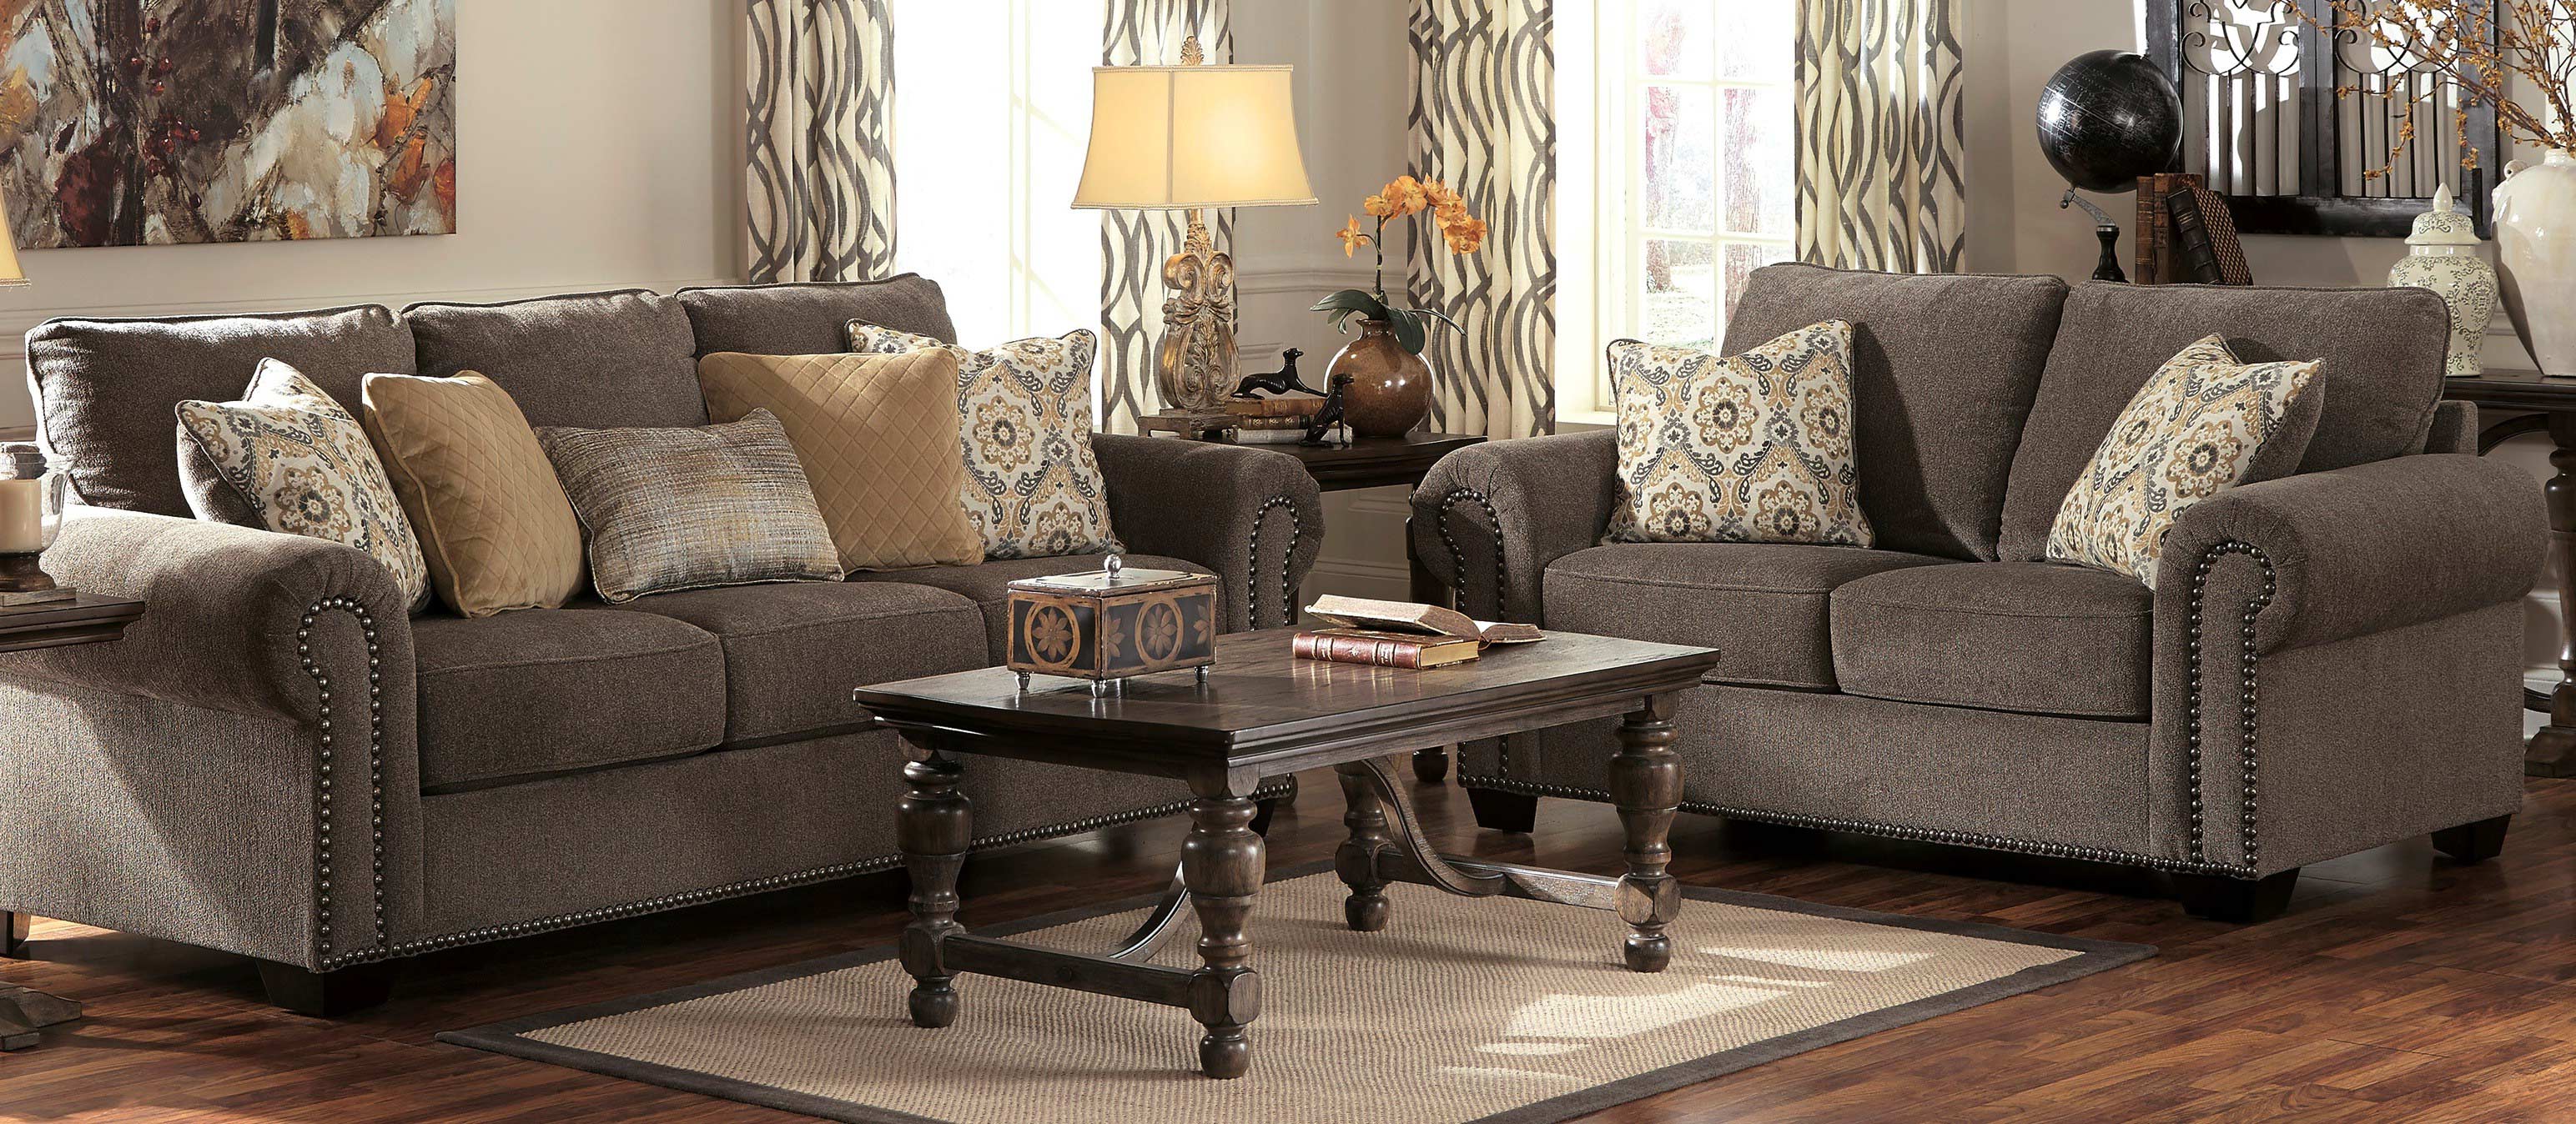 Rooms To Go Living Room Set